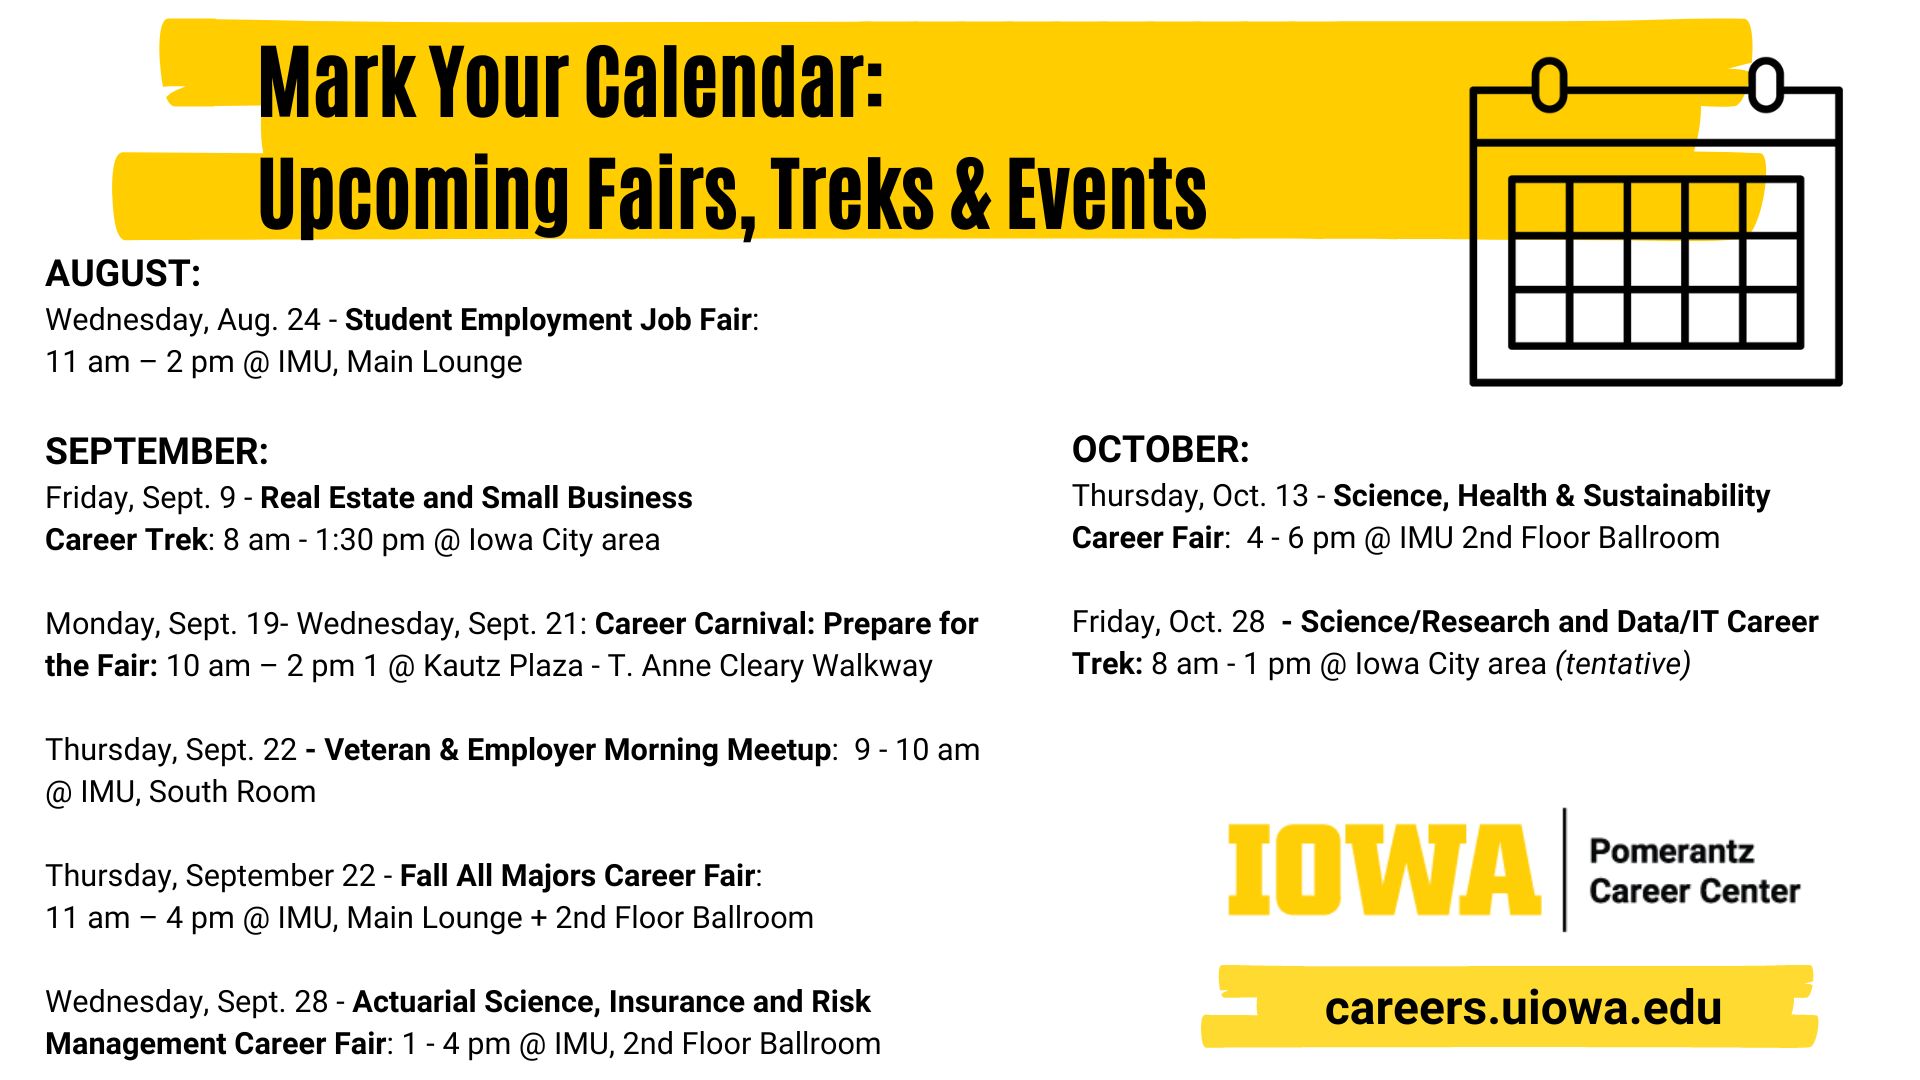 Upcoming career fairs and events